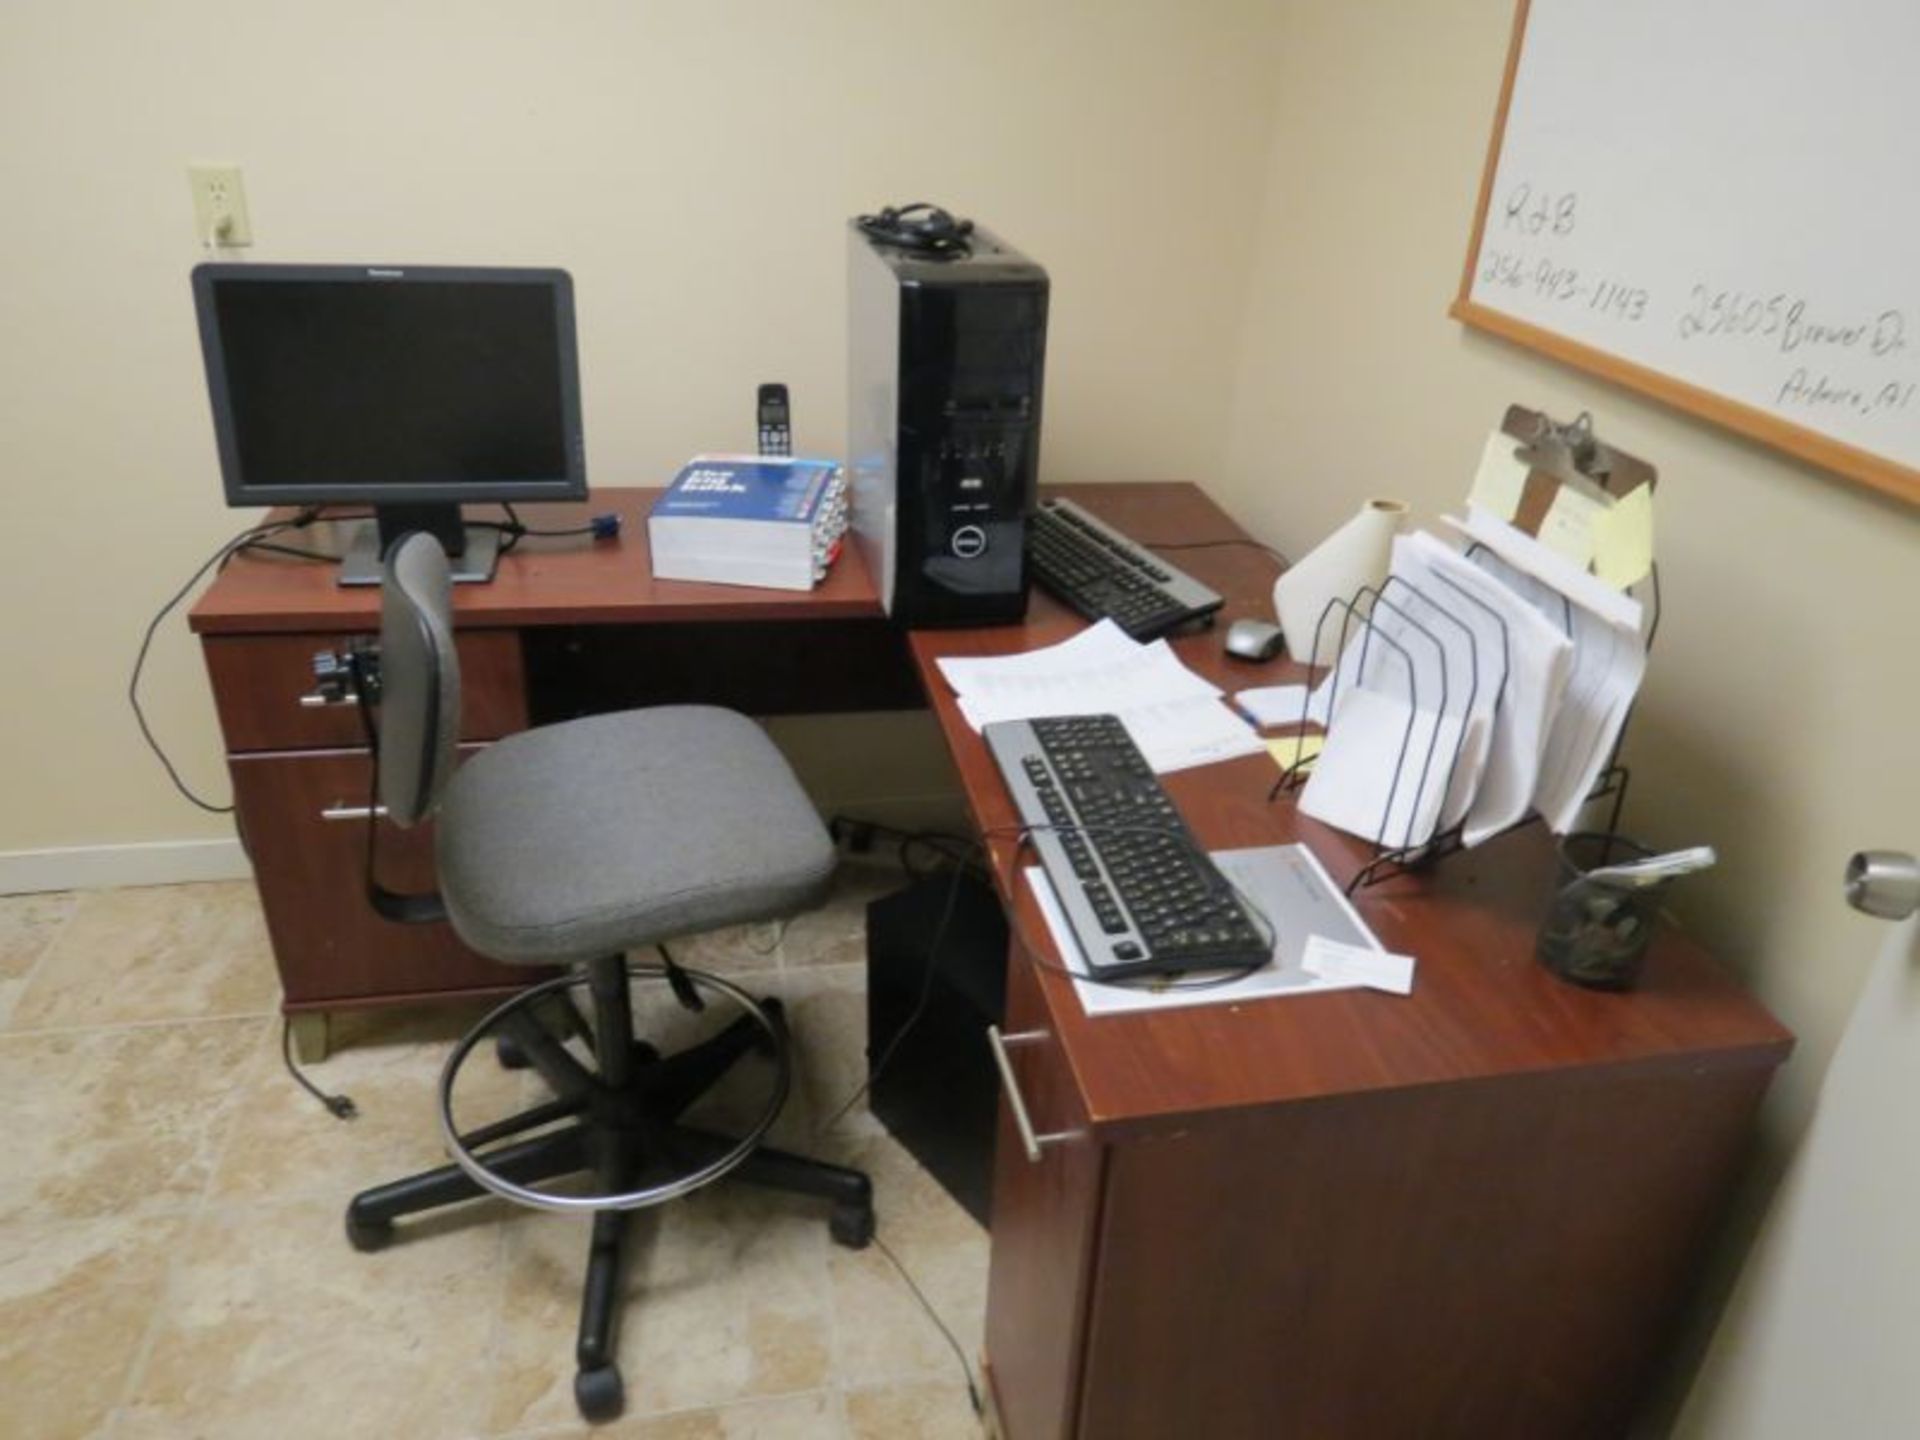 Office Content, Computer, Desk, and Chairs - Image 3 of 3